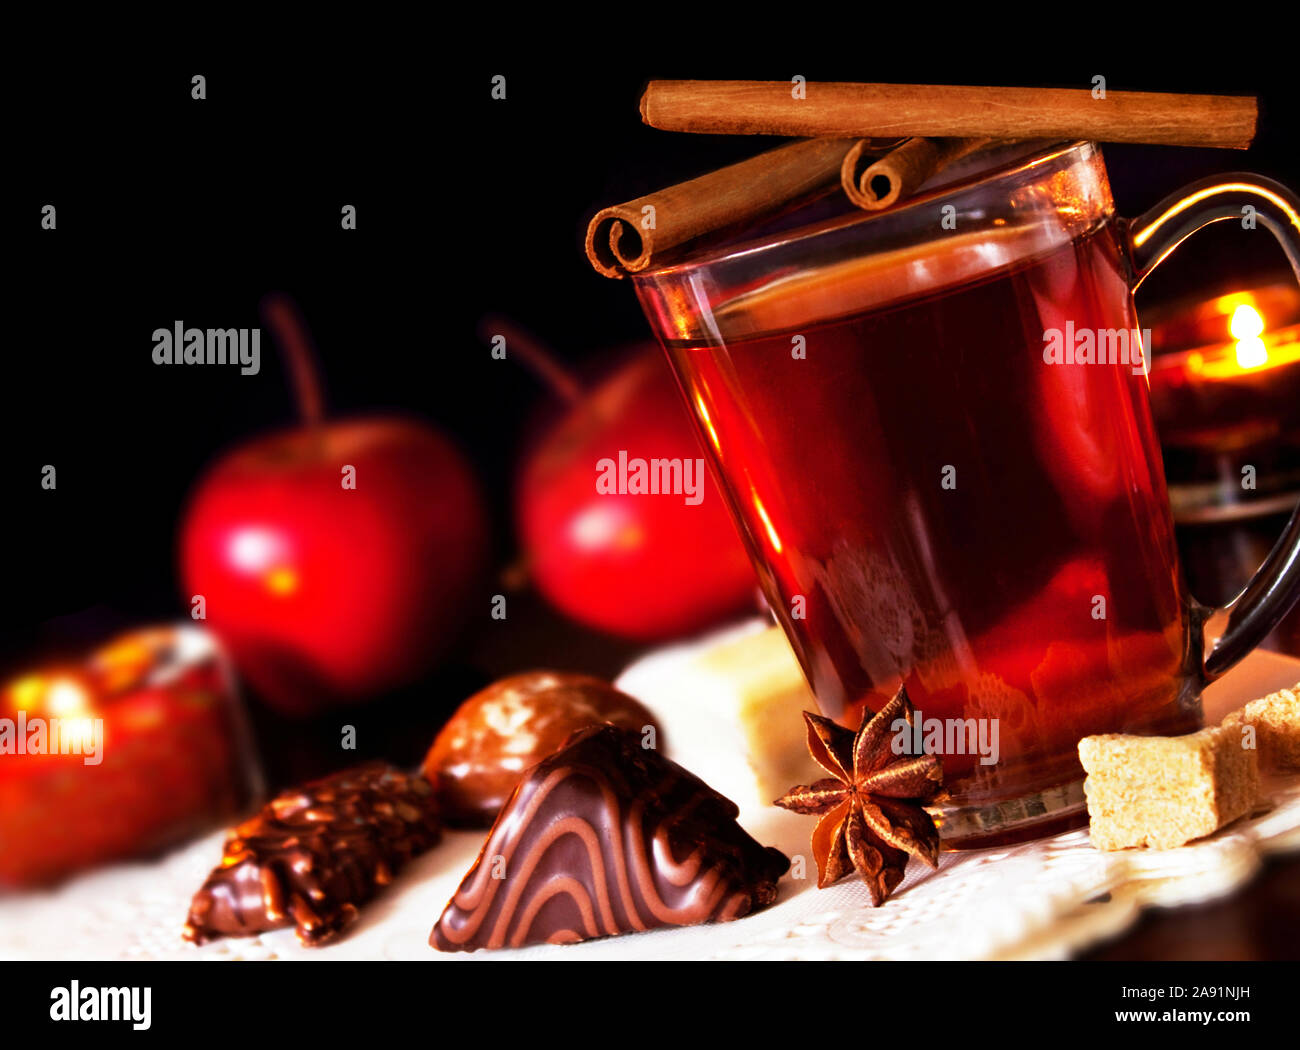 Christmas party and hot spiced wine Stock Photo